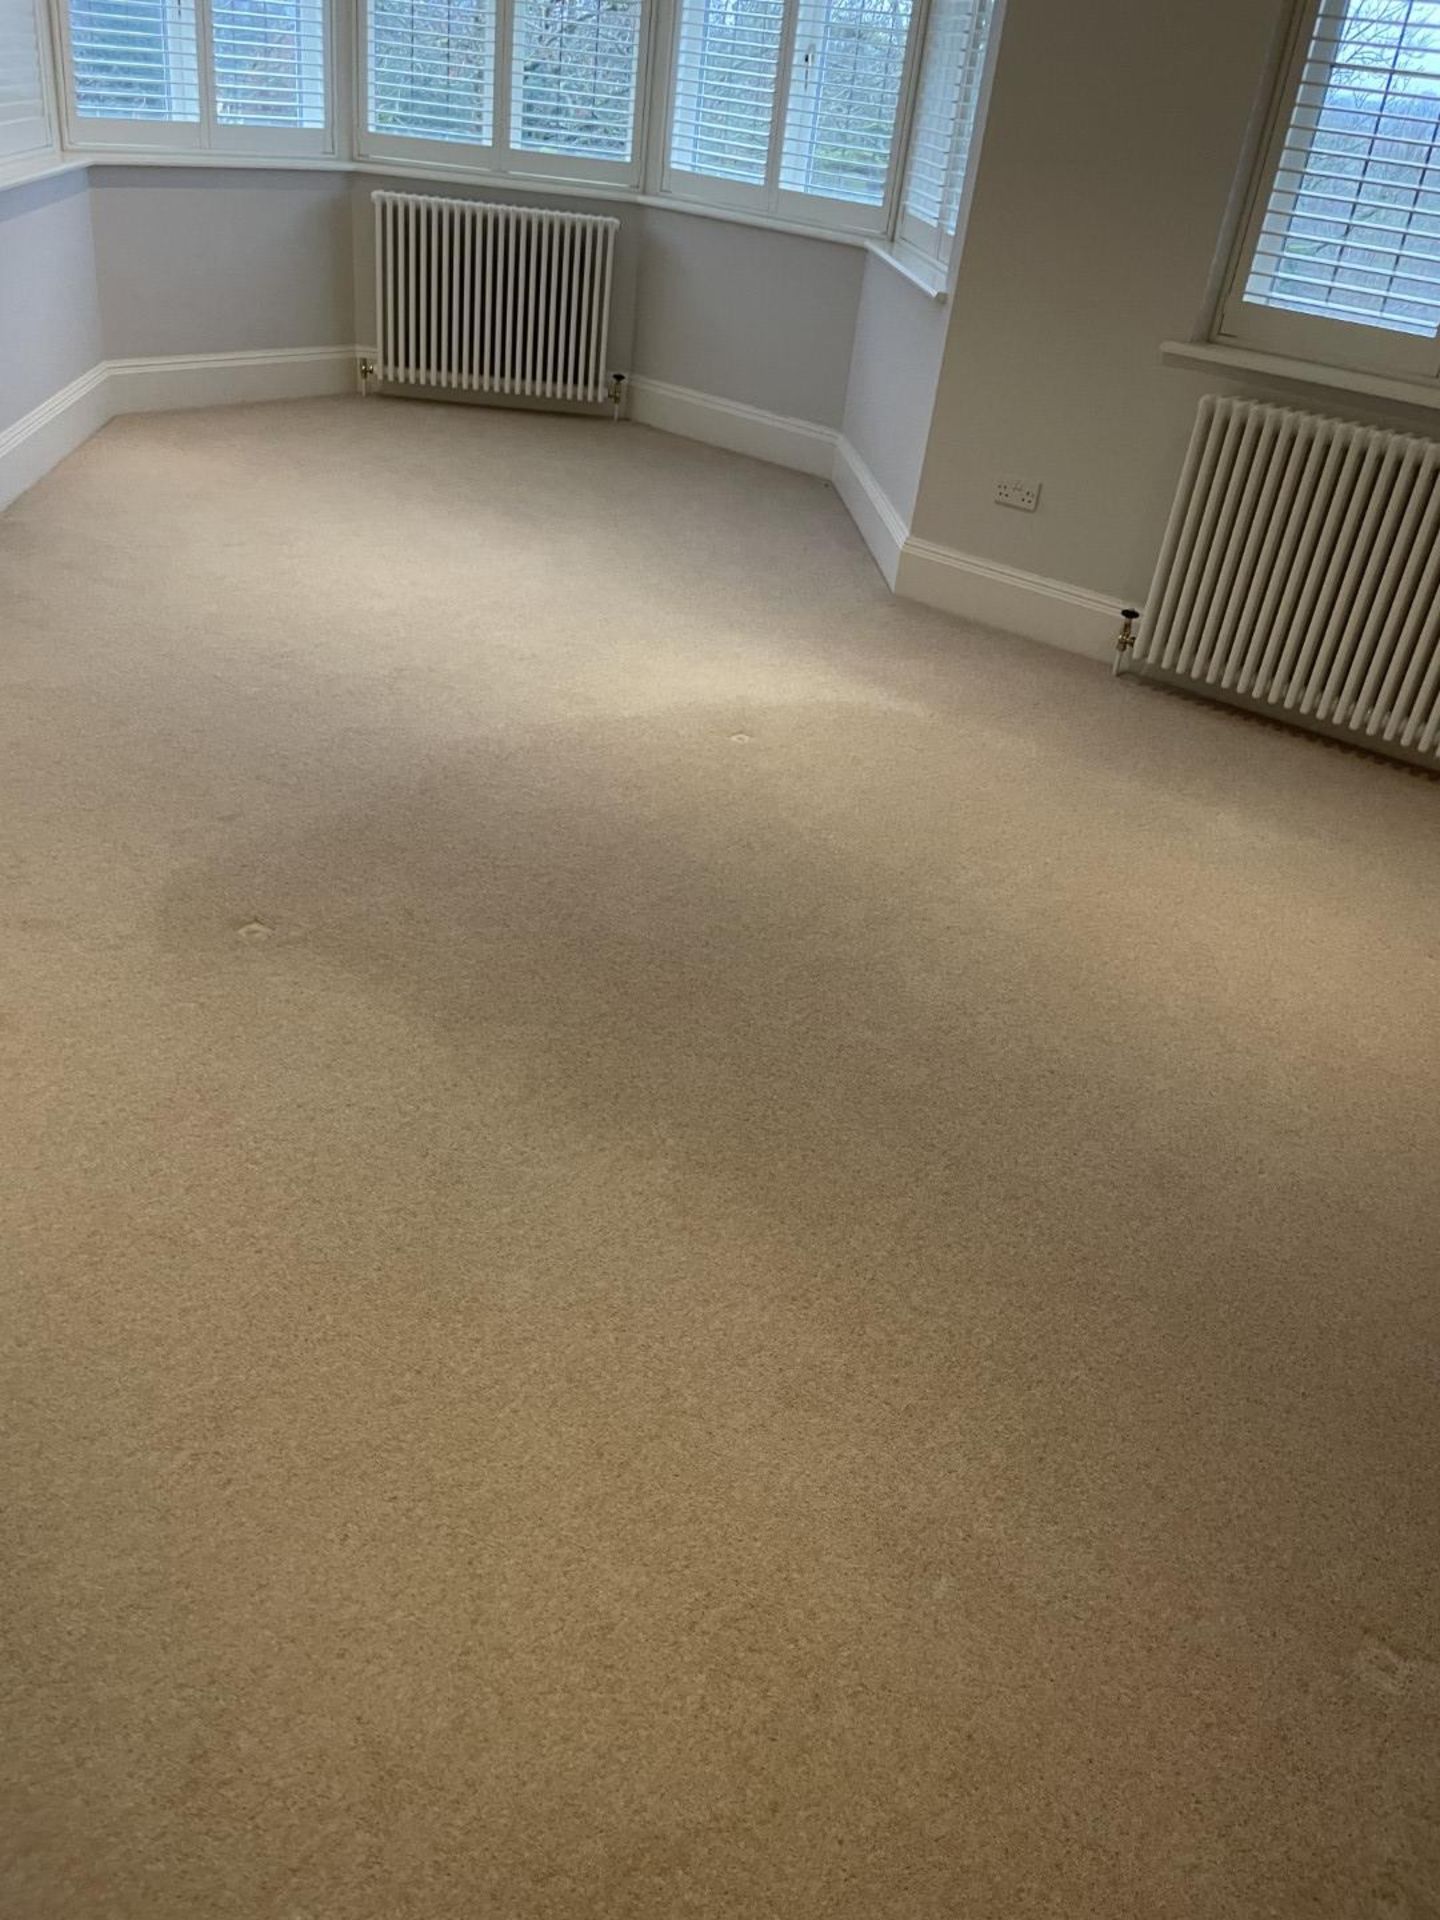 1 x Luxury Wool Back Bedroom Carpet in a Neutral Tone with Premium Underlay - Image 16 of 16